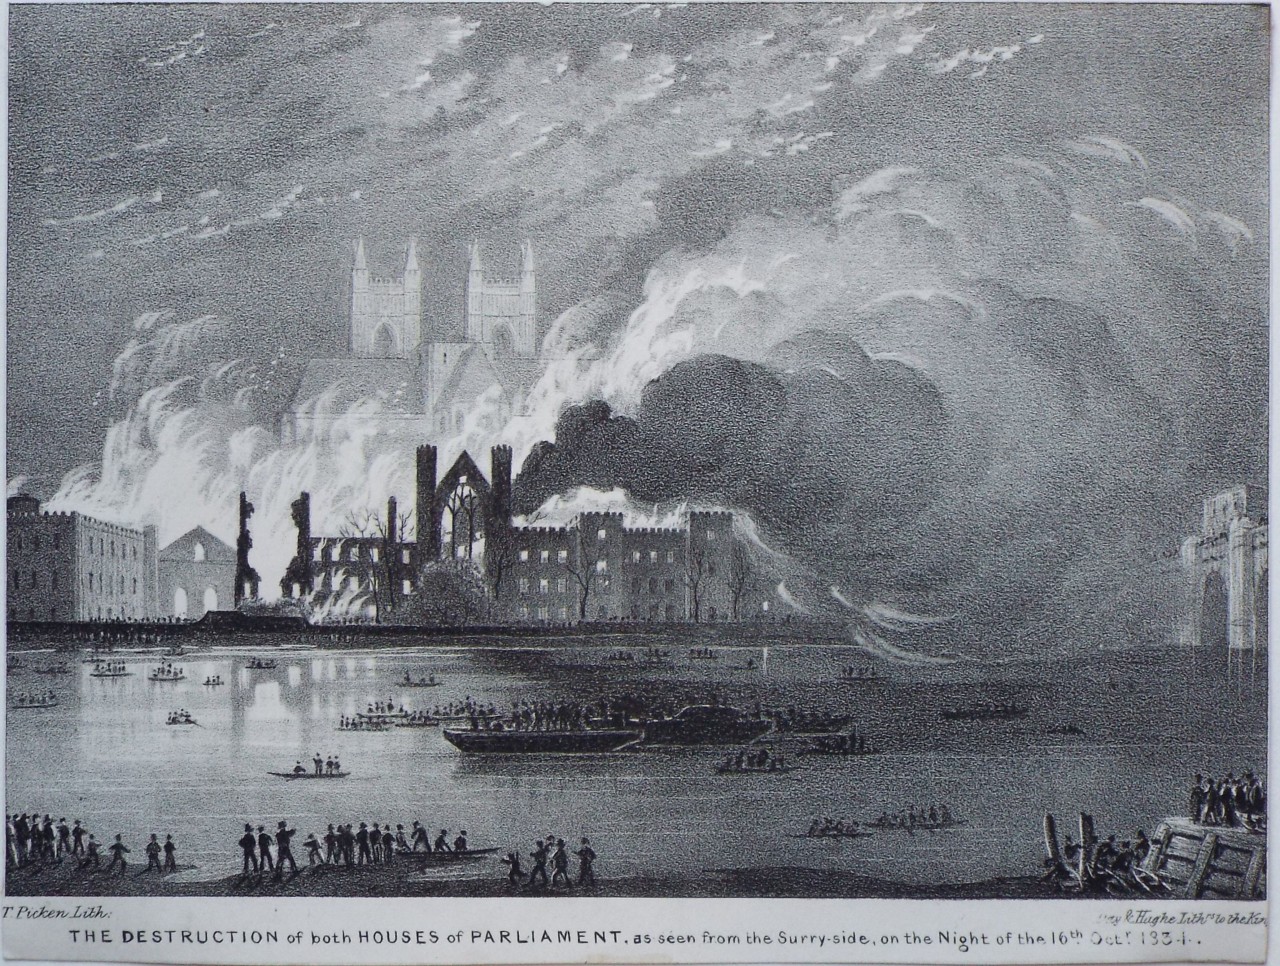 Lithograph - The Destruction by Fire of Both Houses of Parliament, as seen from the Surry-side, on the night 16th Octr. 1834. - Picken